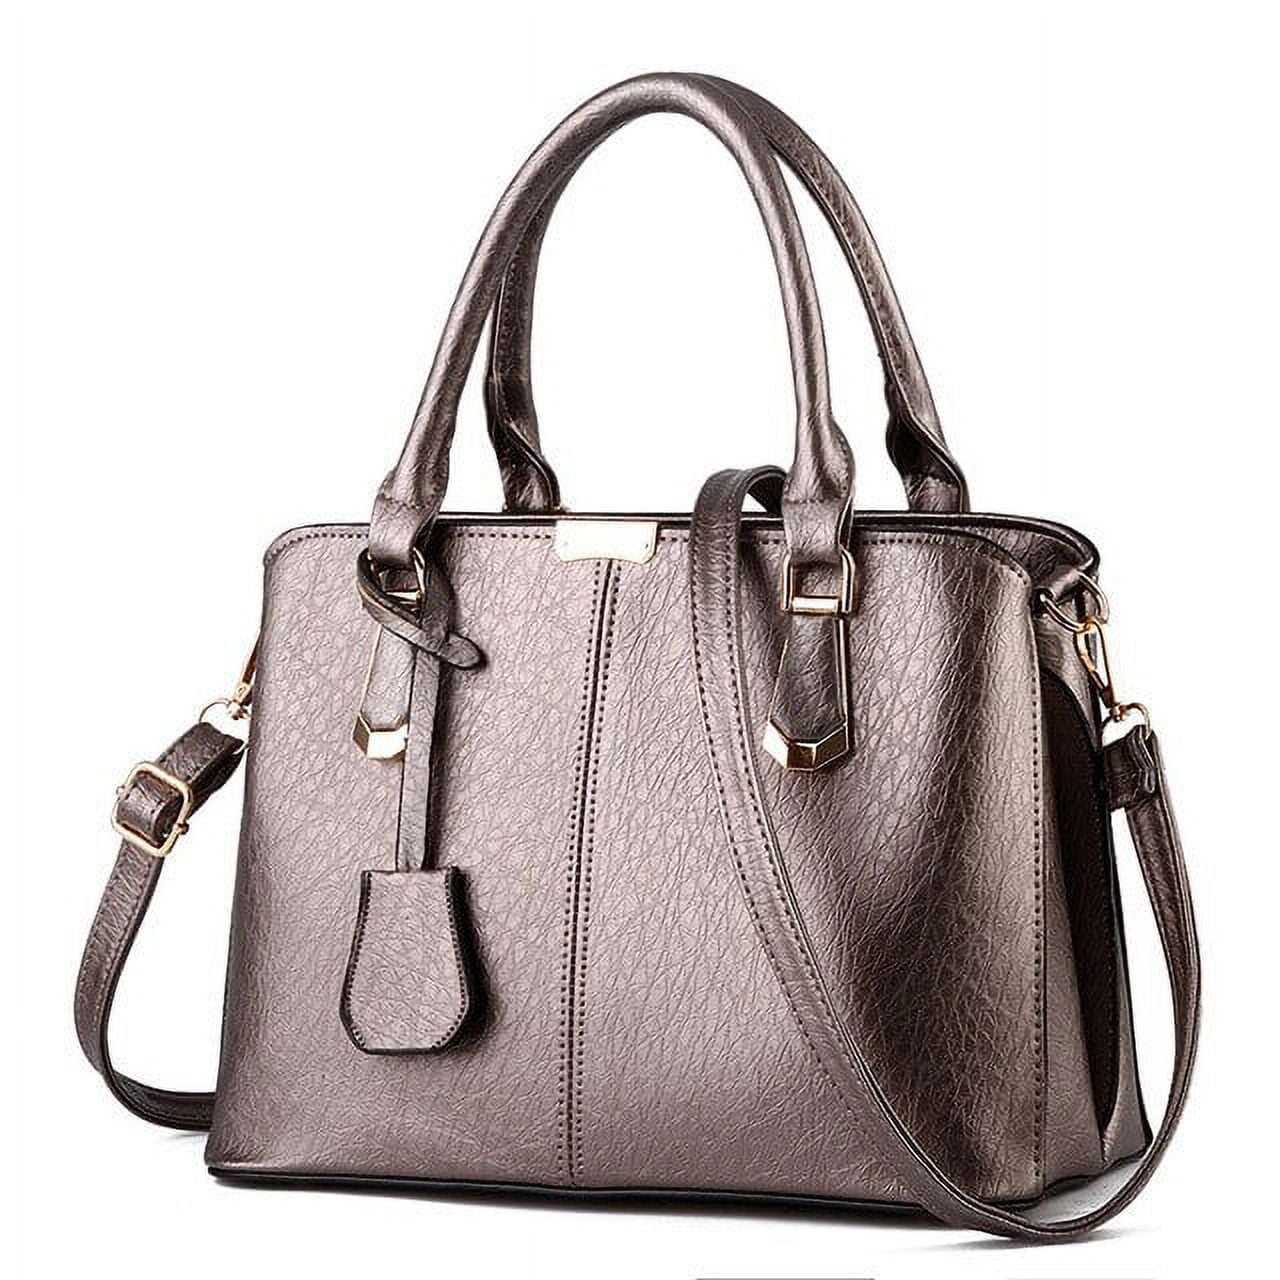 CoCopeaunt Luxury Handbags Women Bags Designer PU Soft Leather Shoulder  Bags for Women Famous Brand Fashion Luxe Woman Bag Kabelka sac